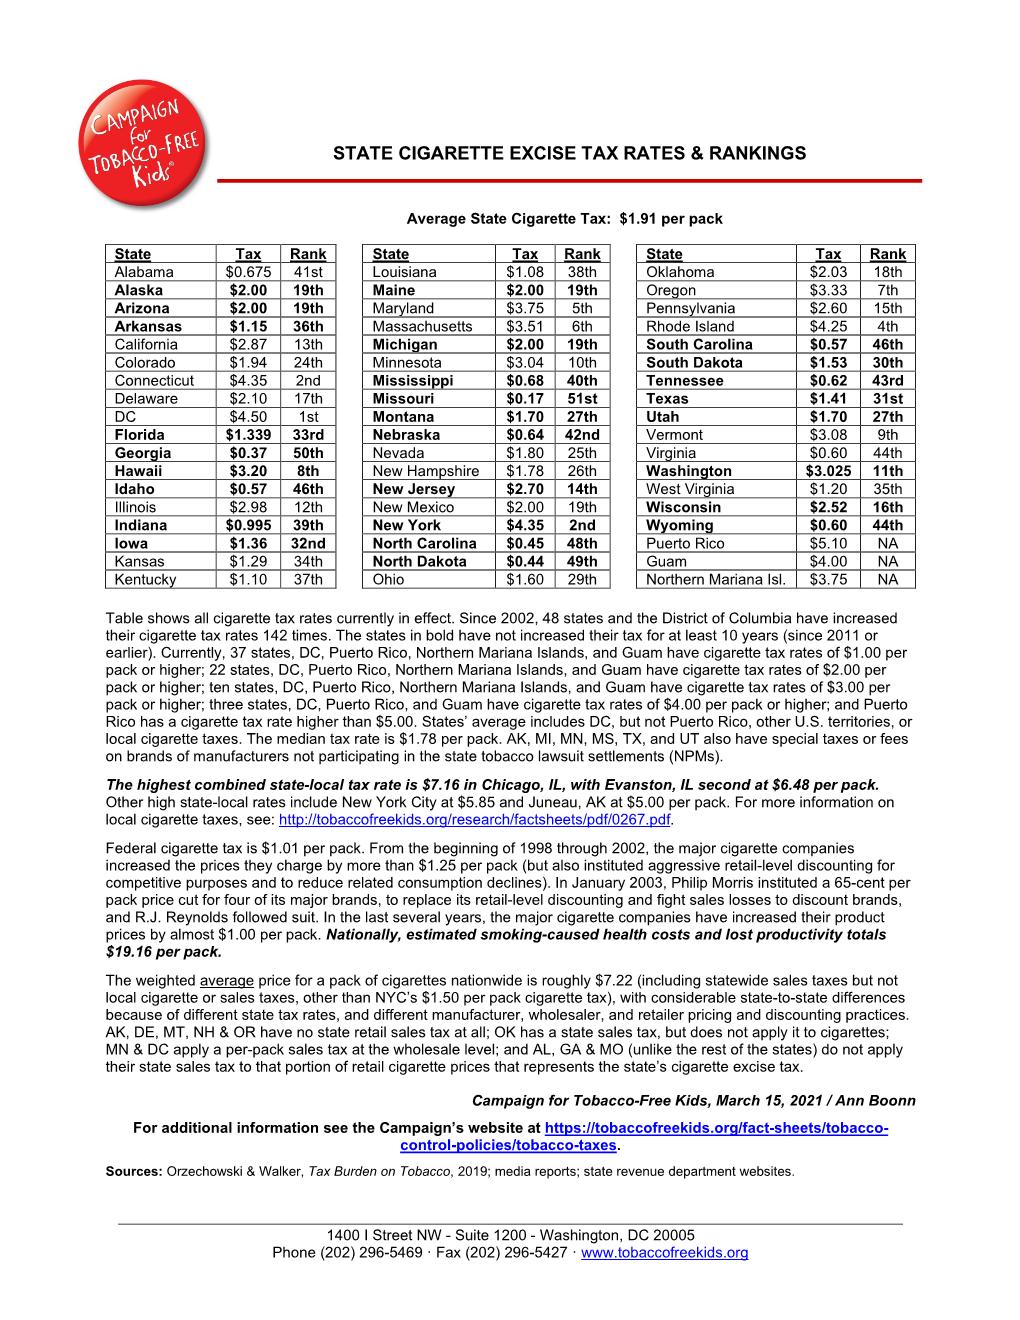 State Cigarette Excise Tax Rates & Rankings